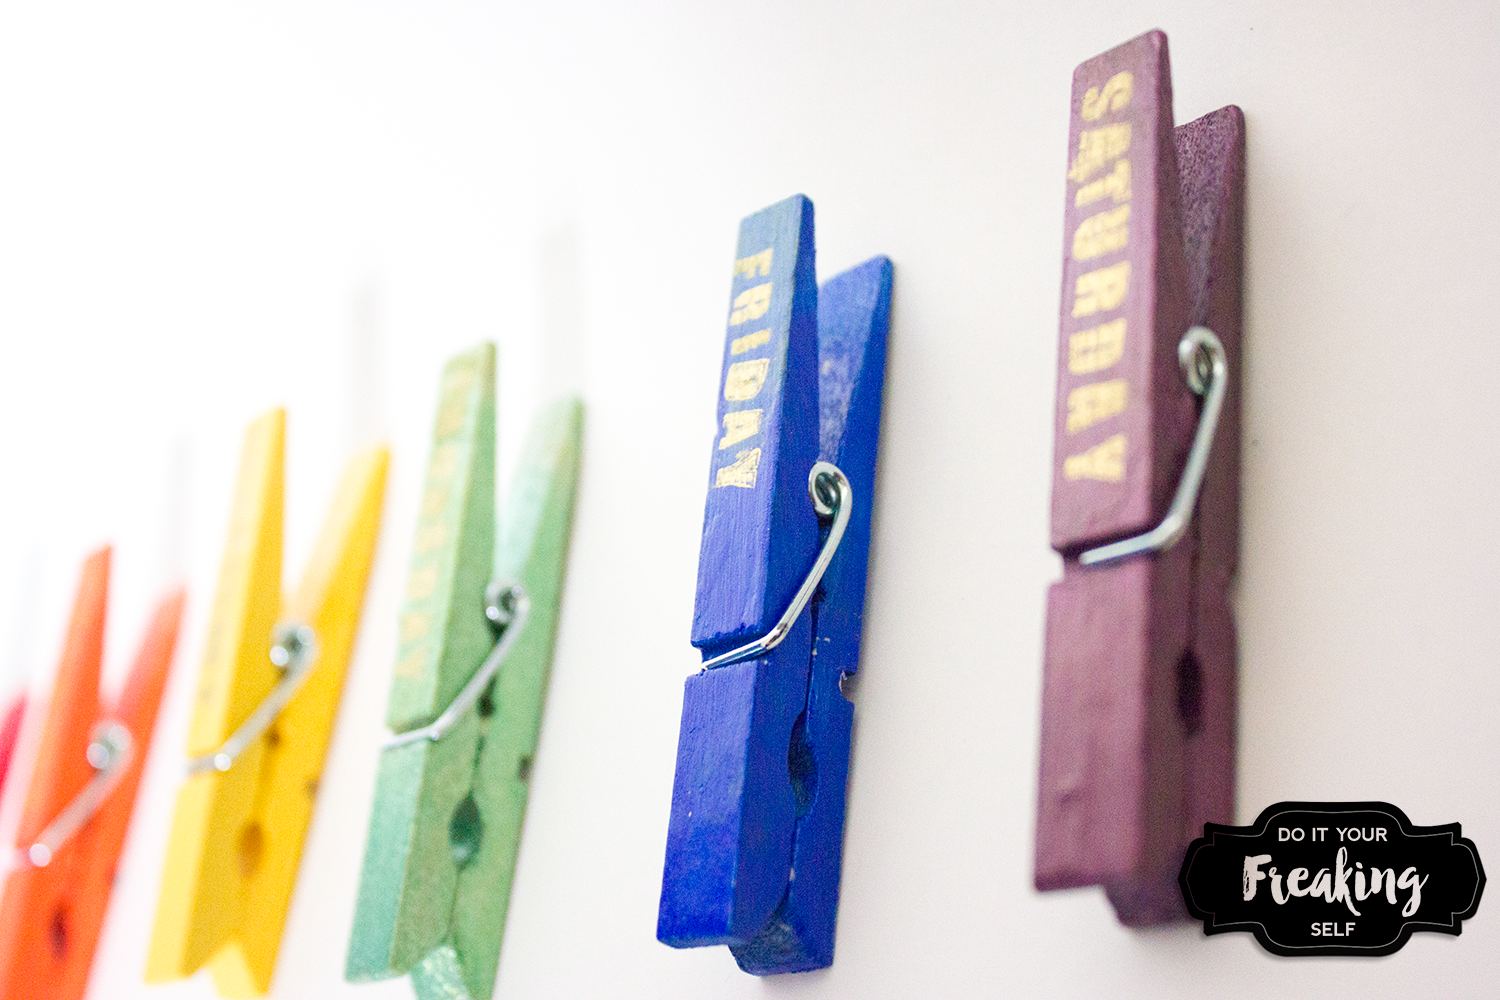 Day of the Week Clothes Pins - Make and use rainbow clips to organize your closet, school lunches and to do lists